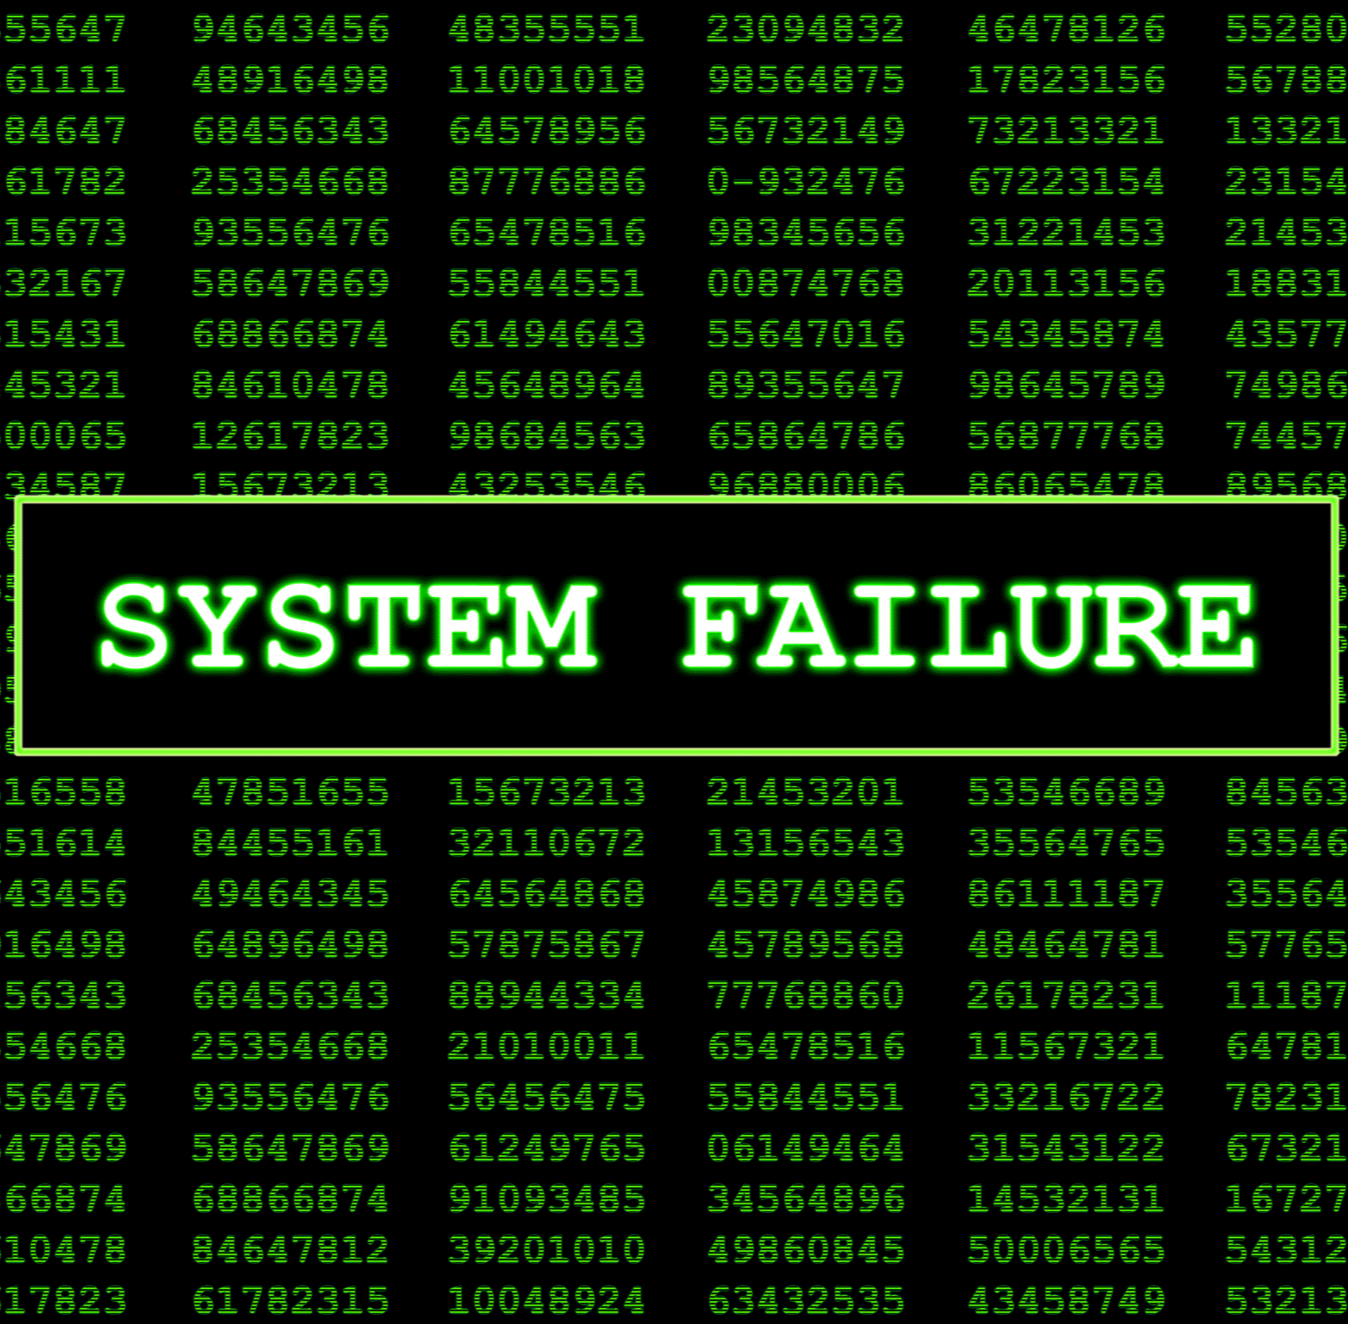 These systems are failing. Матрица System failure. Кофта System failure. System failure картинка вертикальная 1200*1920. System failure картинка 1200*1920.